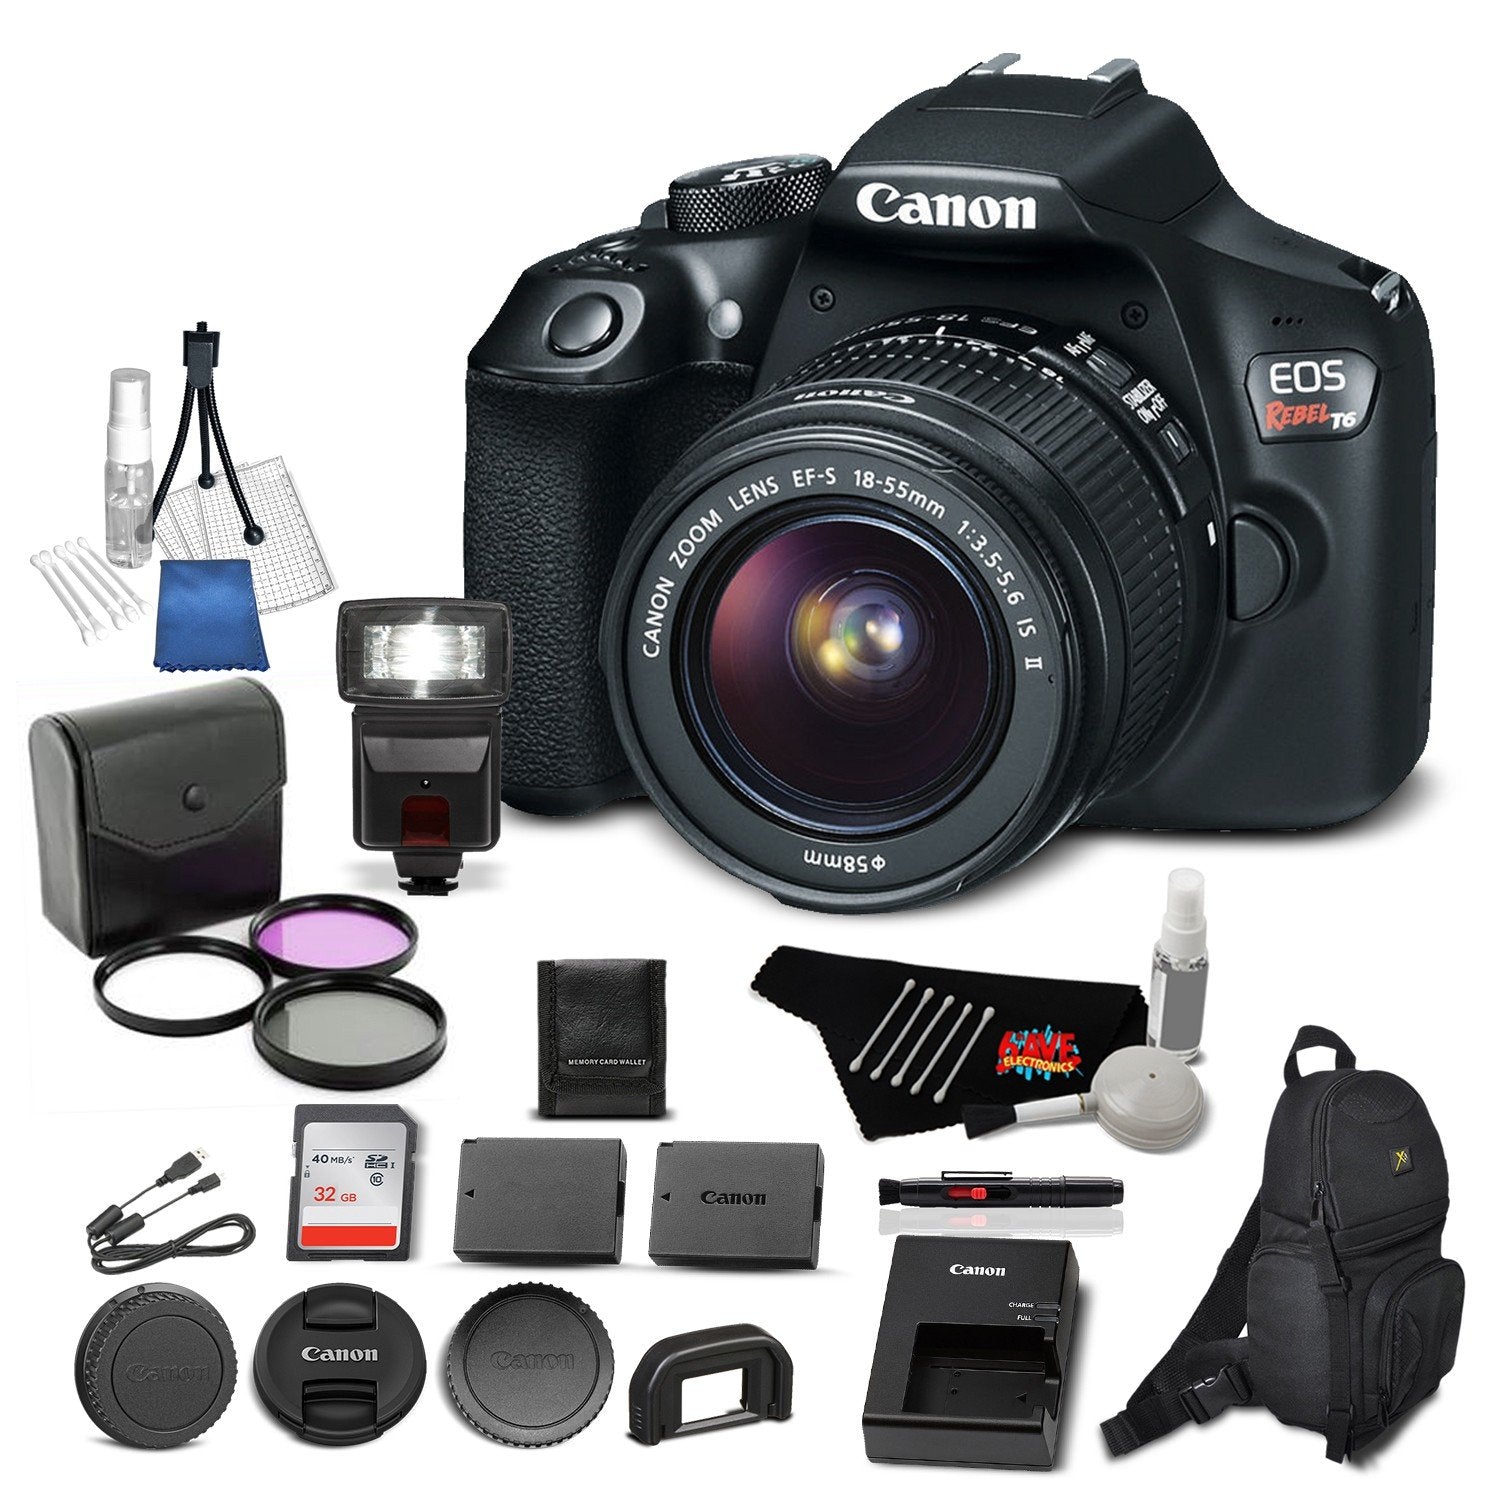 Canon EOS Rebel T6 Digital SLR Camera Bundle with EF-S 18-55mm f/3.5-5.6 IS II Lens with 32GB Memory Card + Filter Kit + More